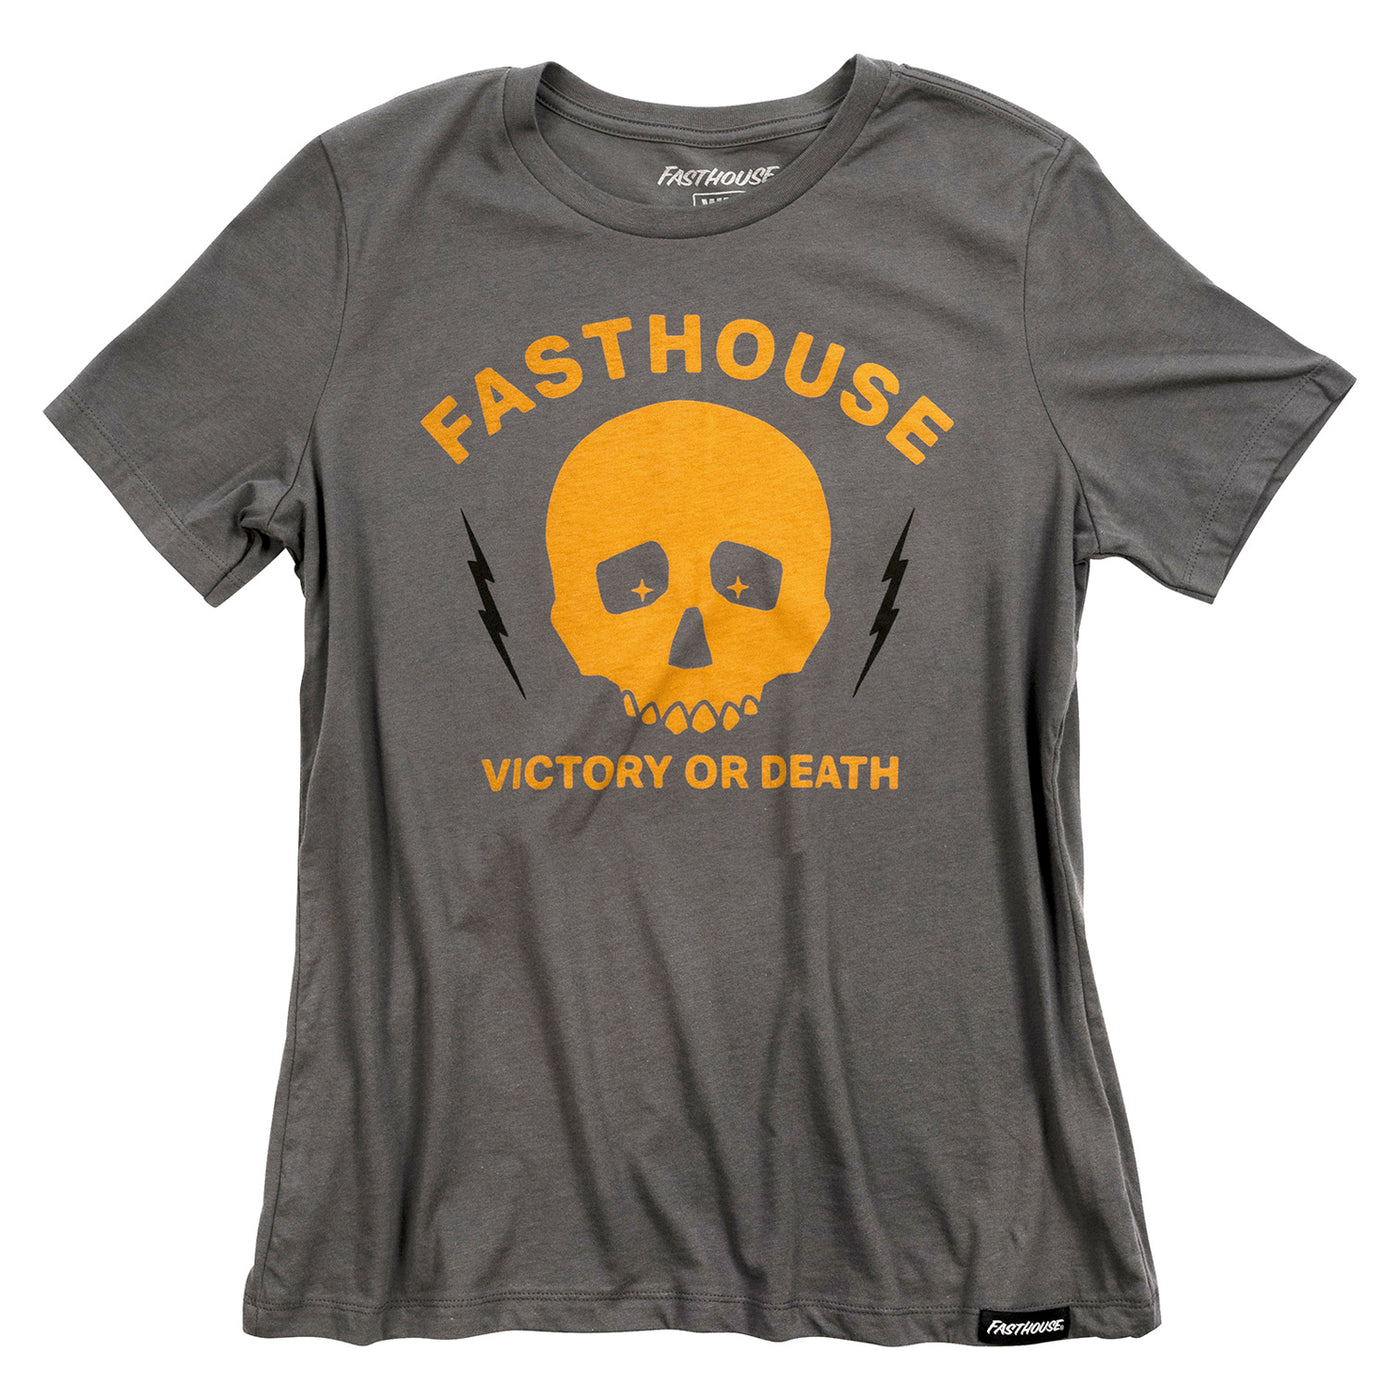 Fasthouse Women's Victory Tee